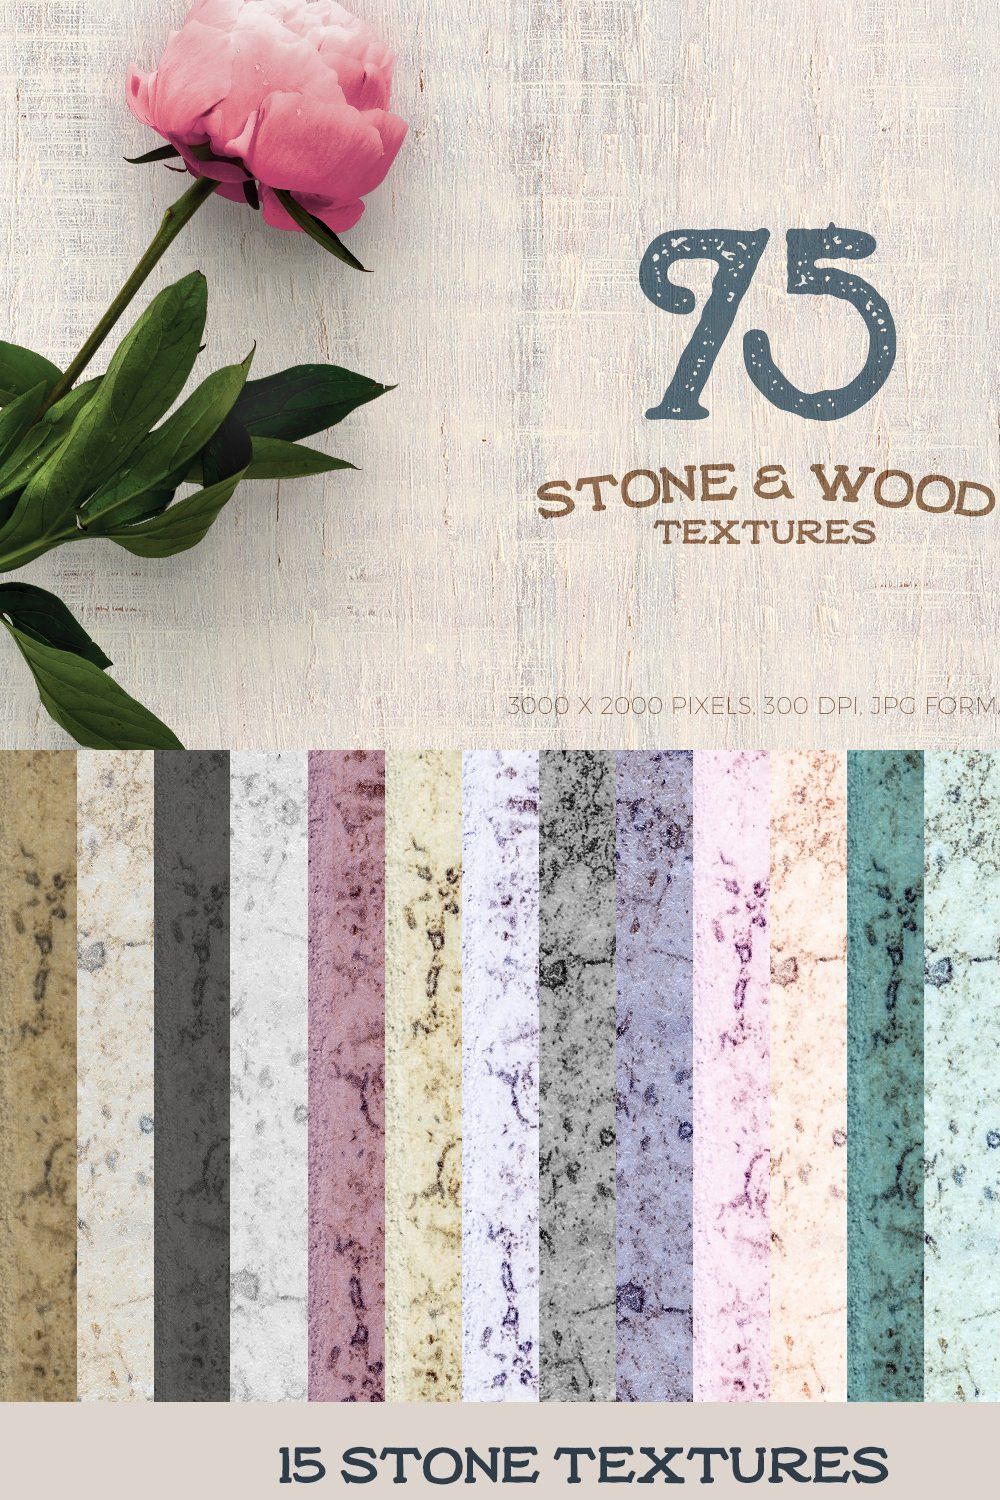 75 Stone & Wood Textures pinterest preview image.